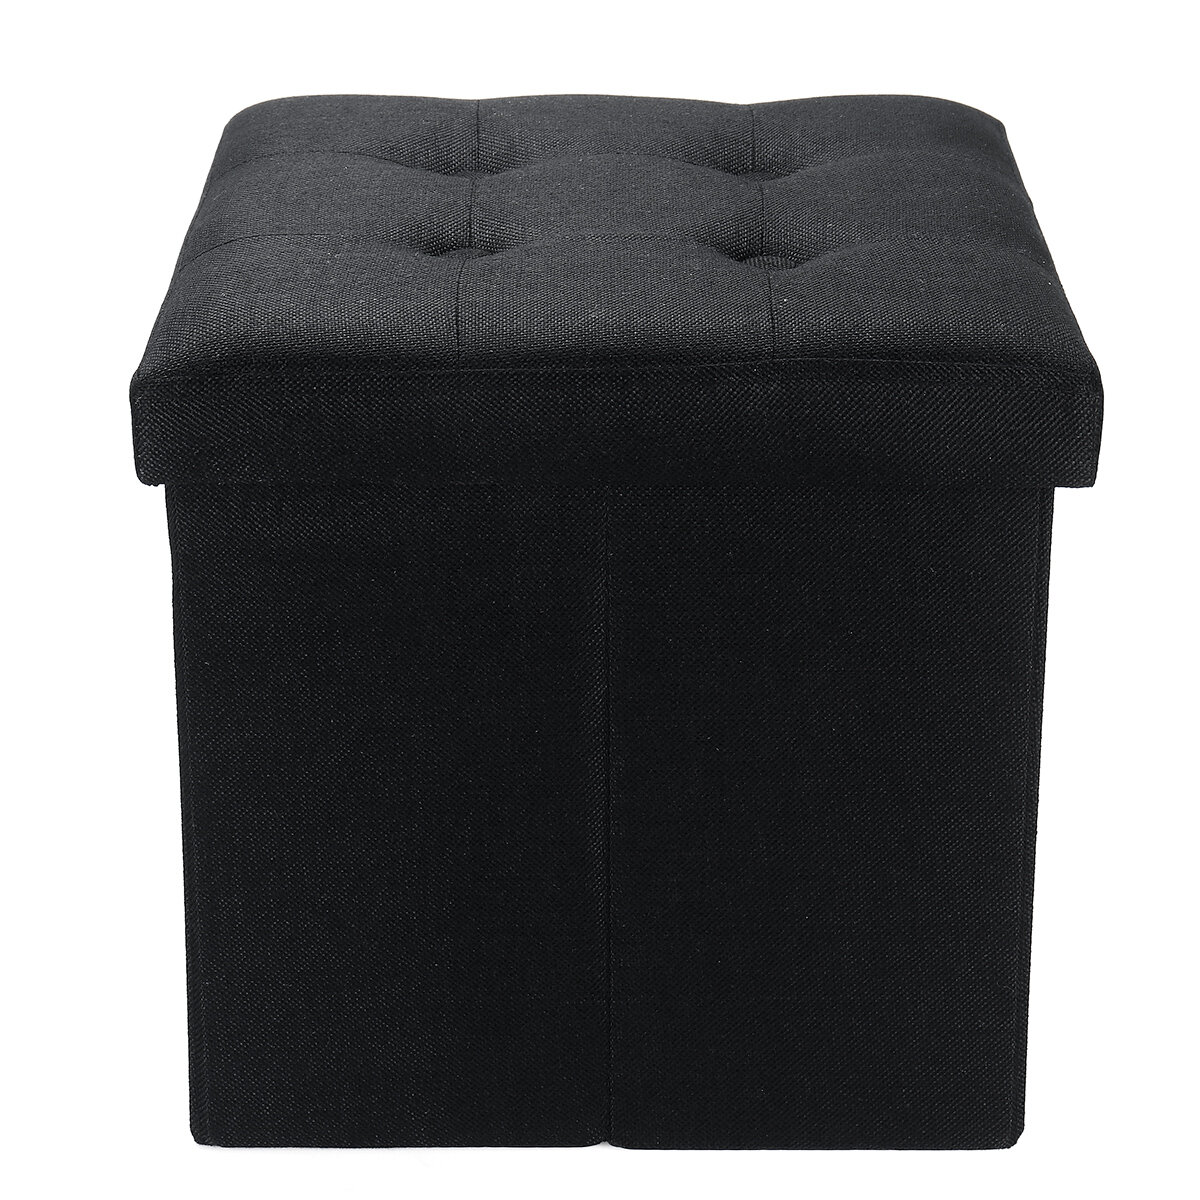 

Folding Storage Stool Linen Sofa Ottoman Multifunctional Footrest Storage Box Bench Seat Footstool Square Chair Home Off